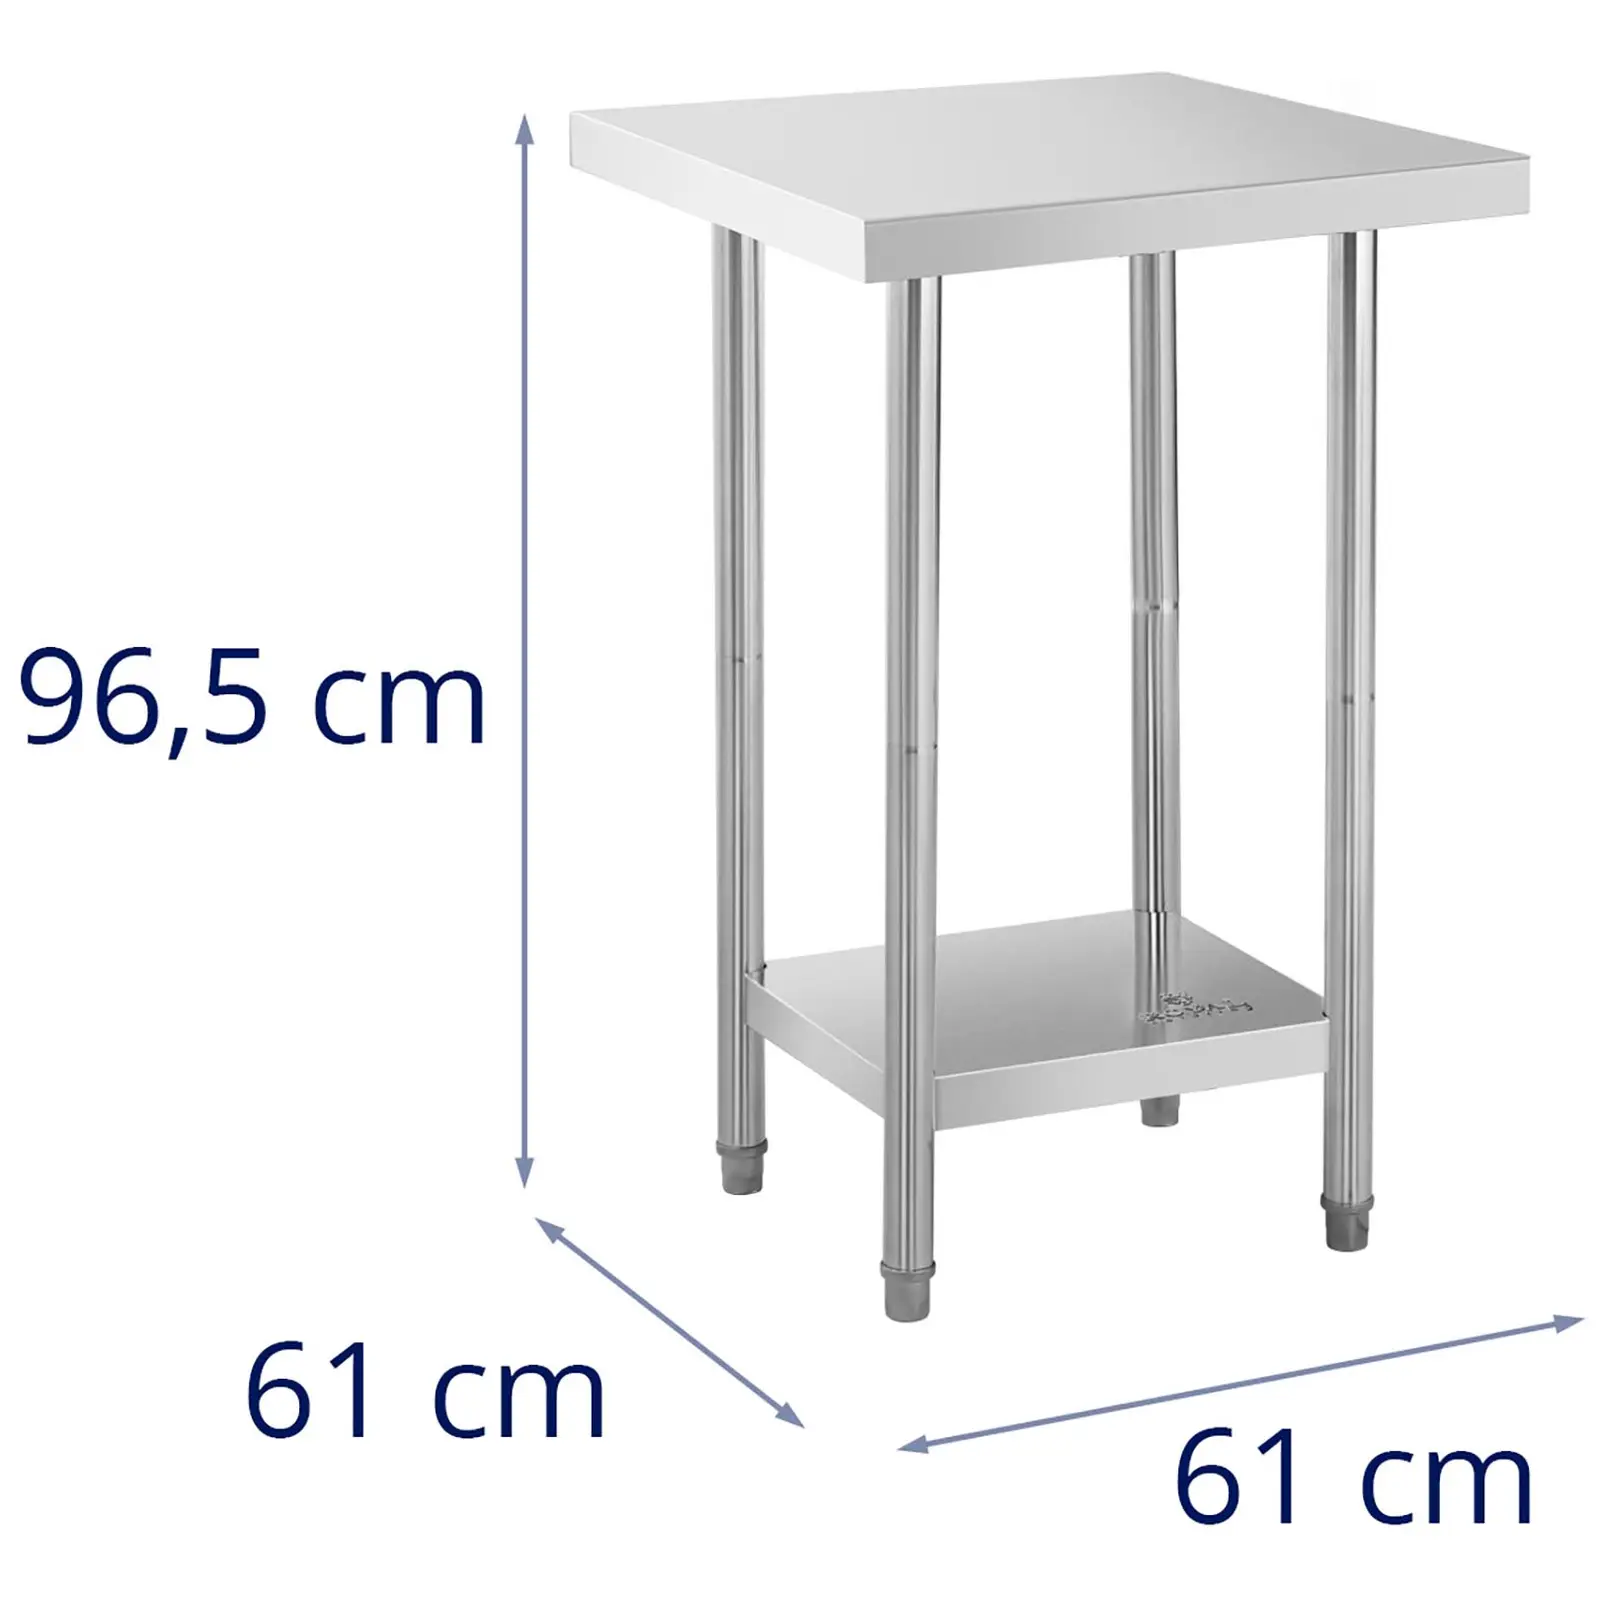 Stainless Steel Work Table - 61 x 61 cm - Royal Catering - 480 kg load capacity